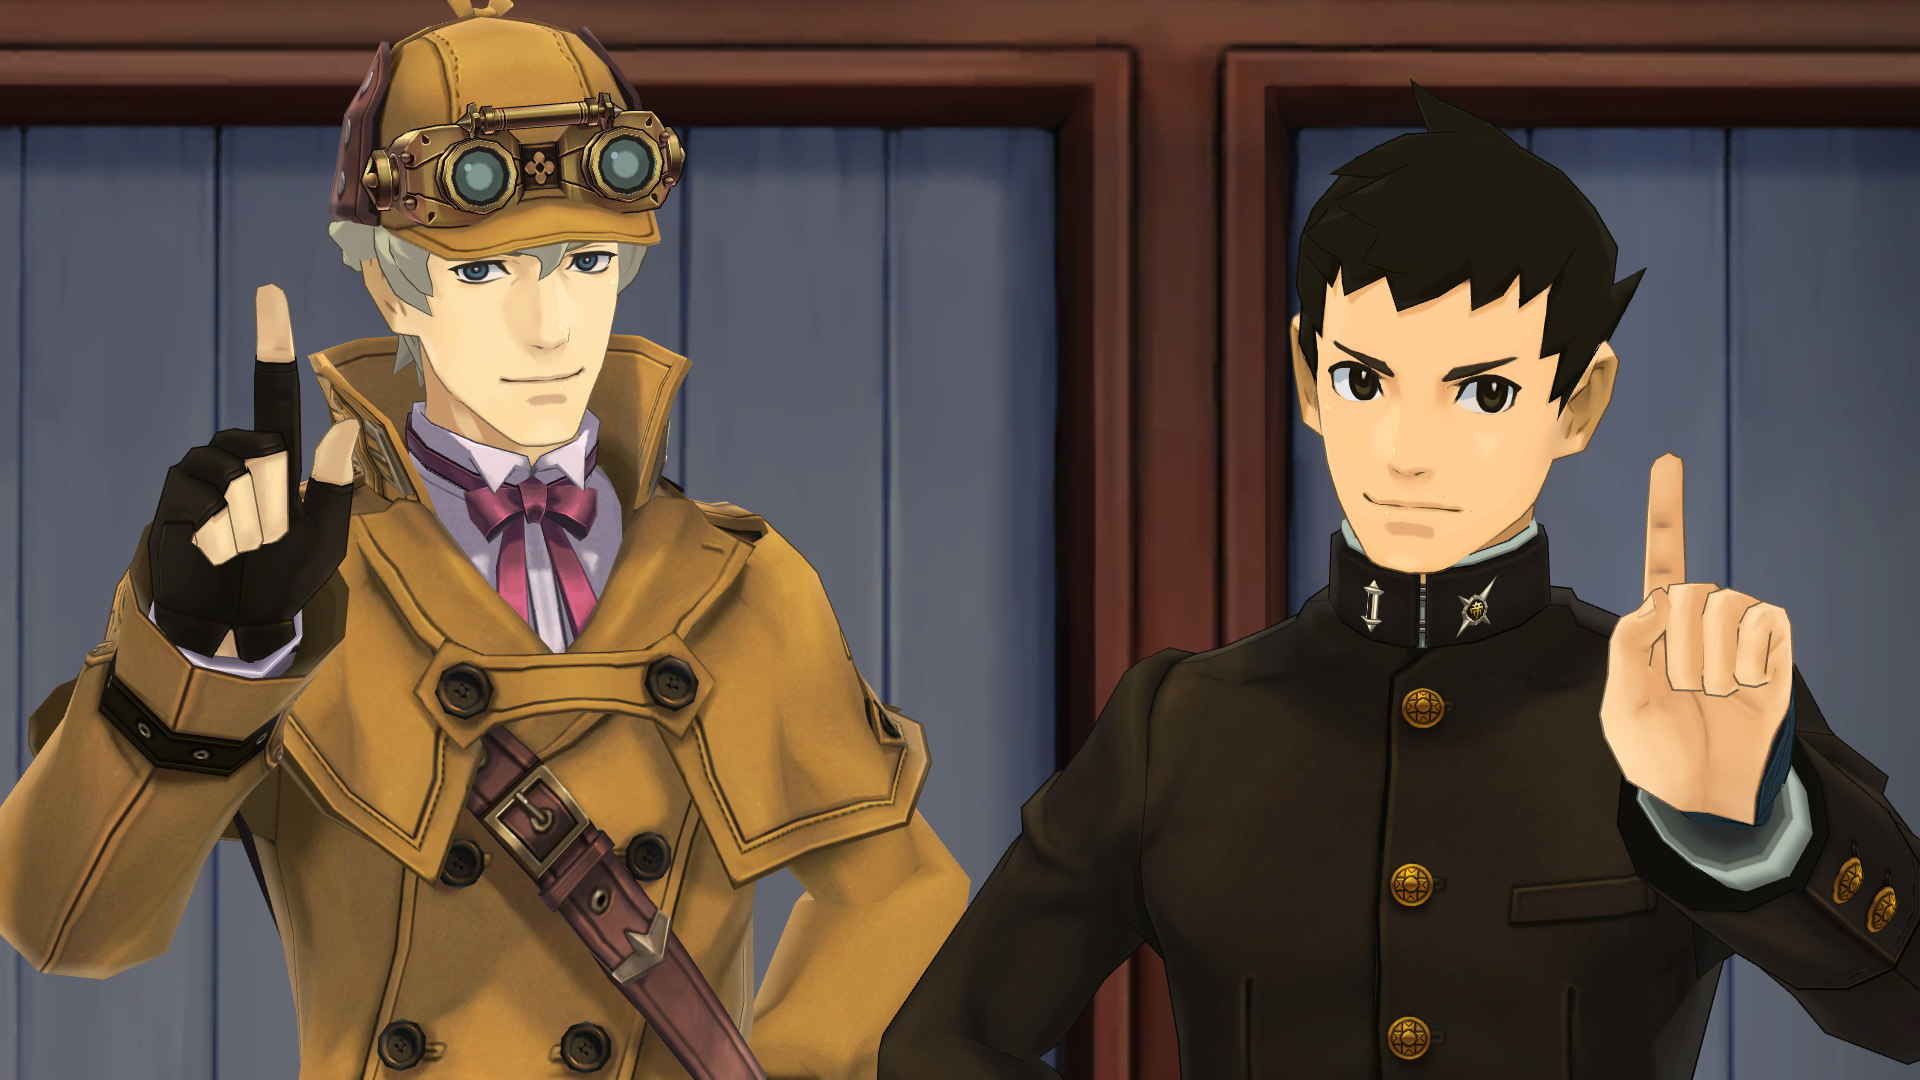 The Great Ace Attorney finally offers a version of Sherlock Holmes who isn’t a massive pain in the ass